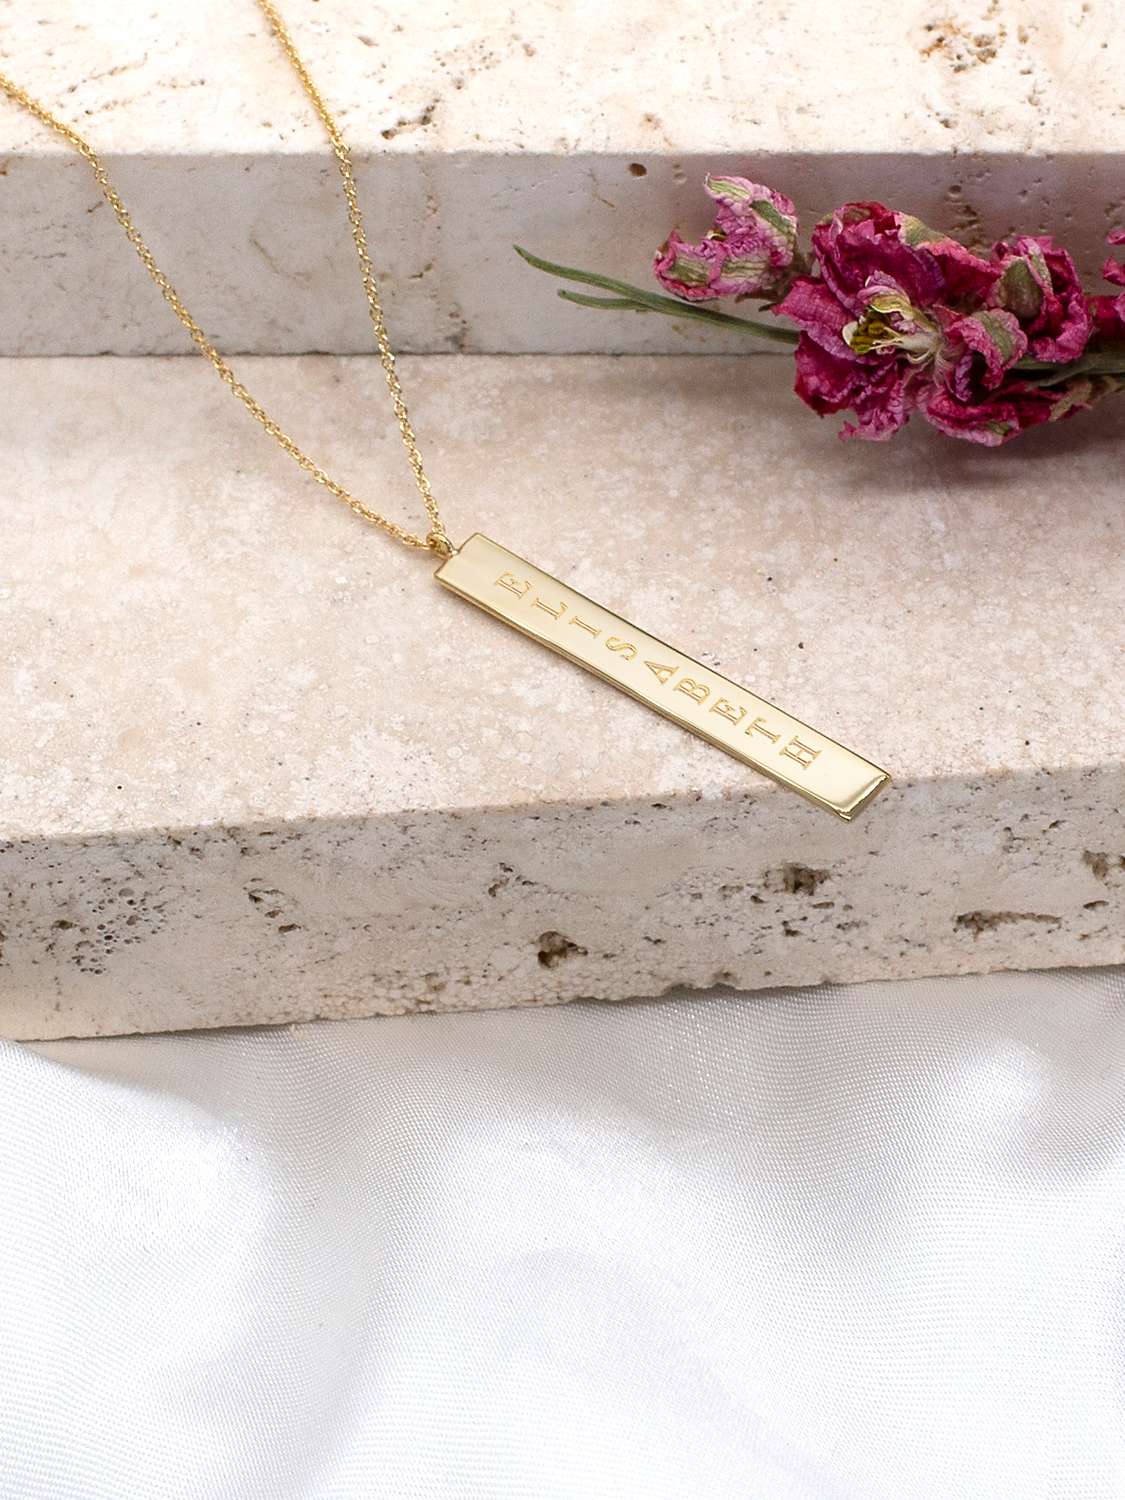 Buy IBB Personalised 9ct Gold Vertical Bar Initial Pendant Necklace Online at johnlewis.com